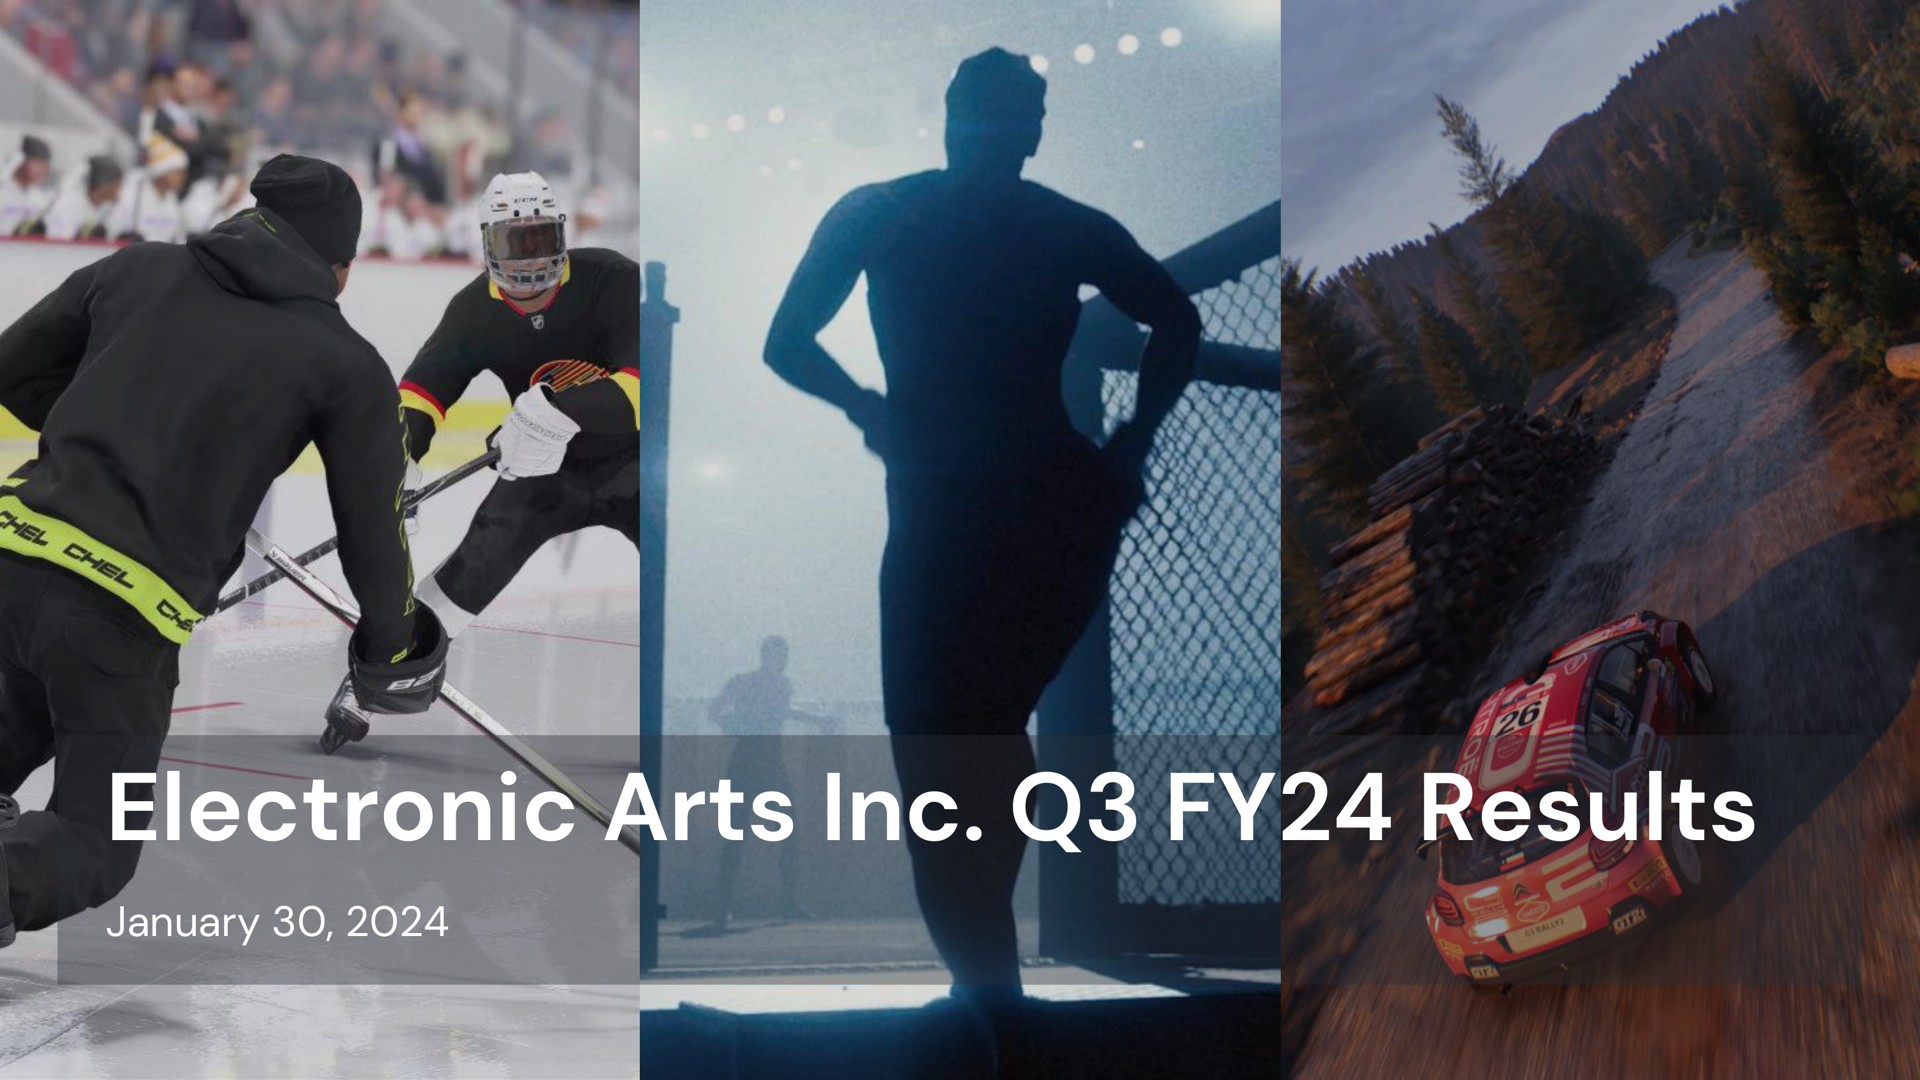 electronic arts results | Electronic Arts